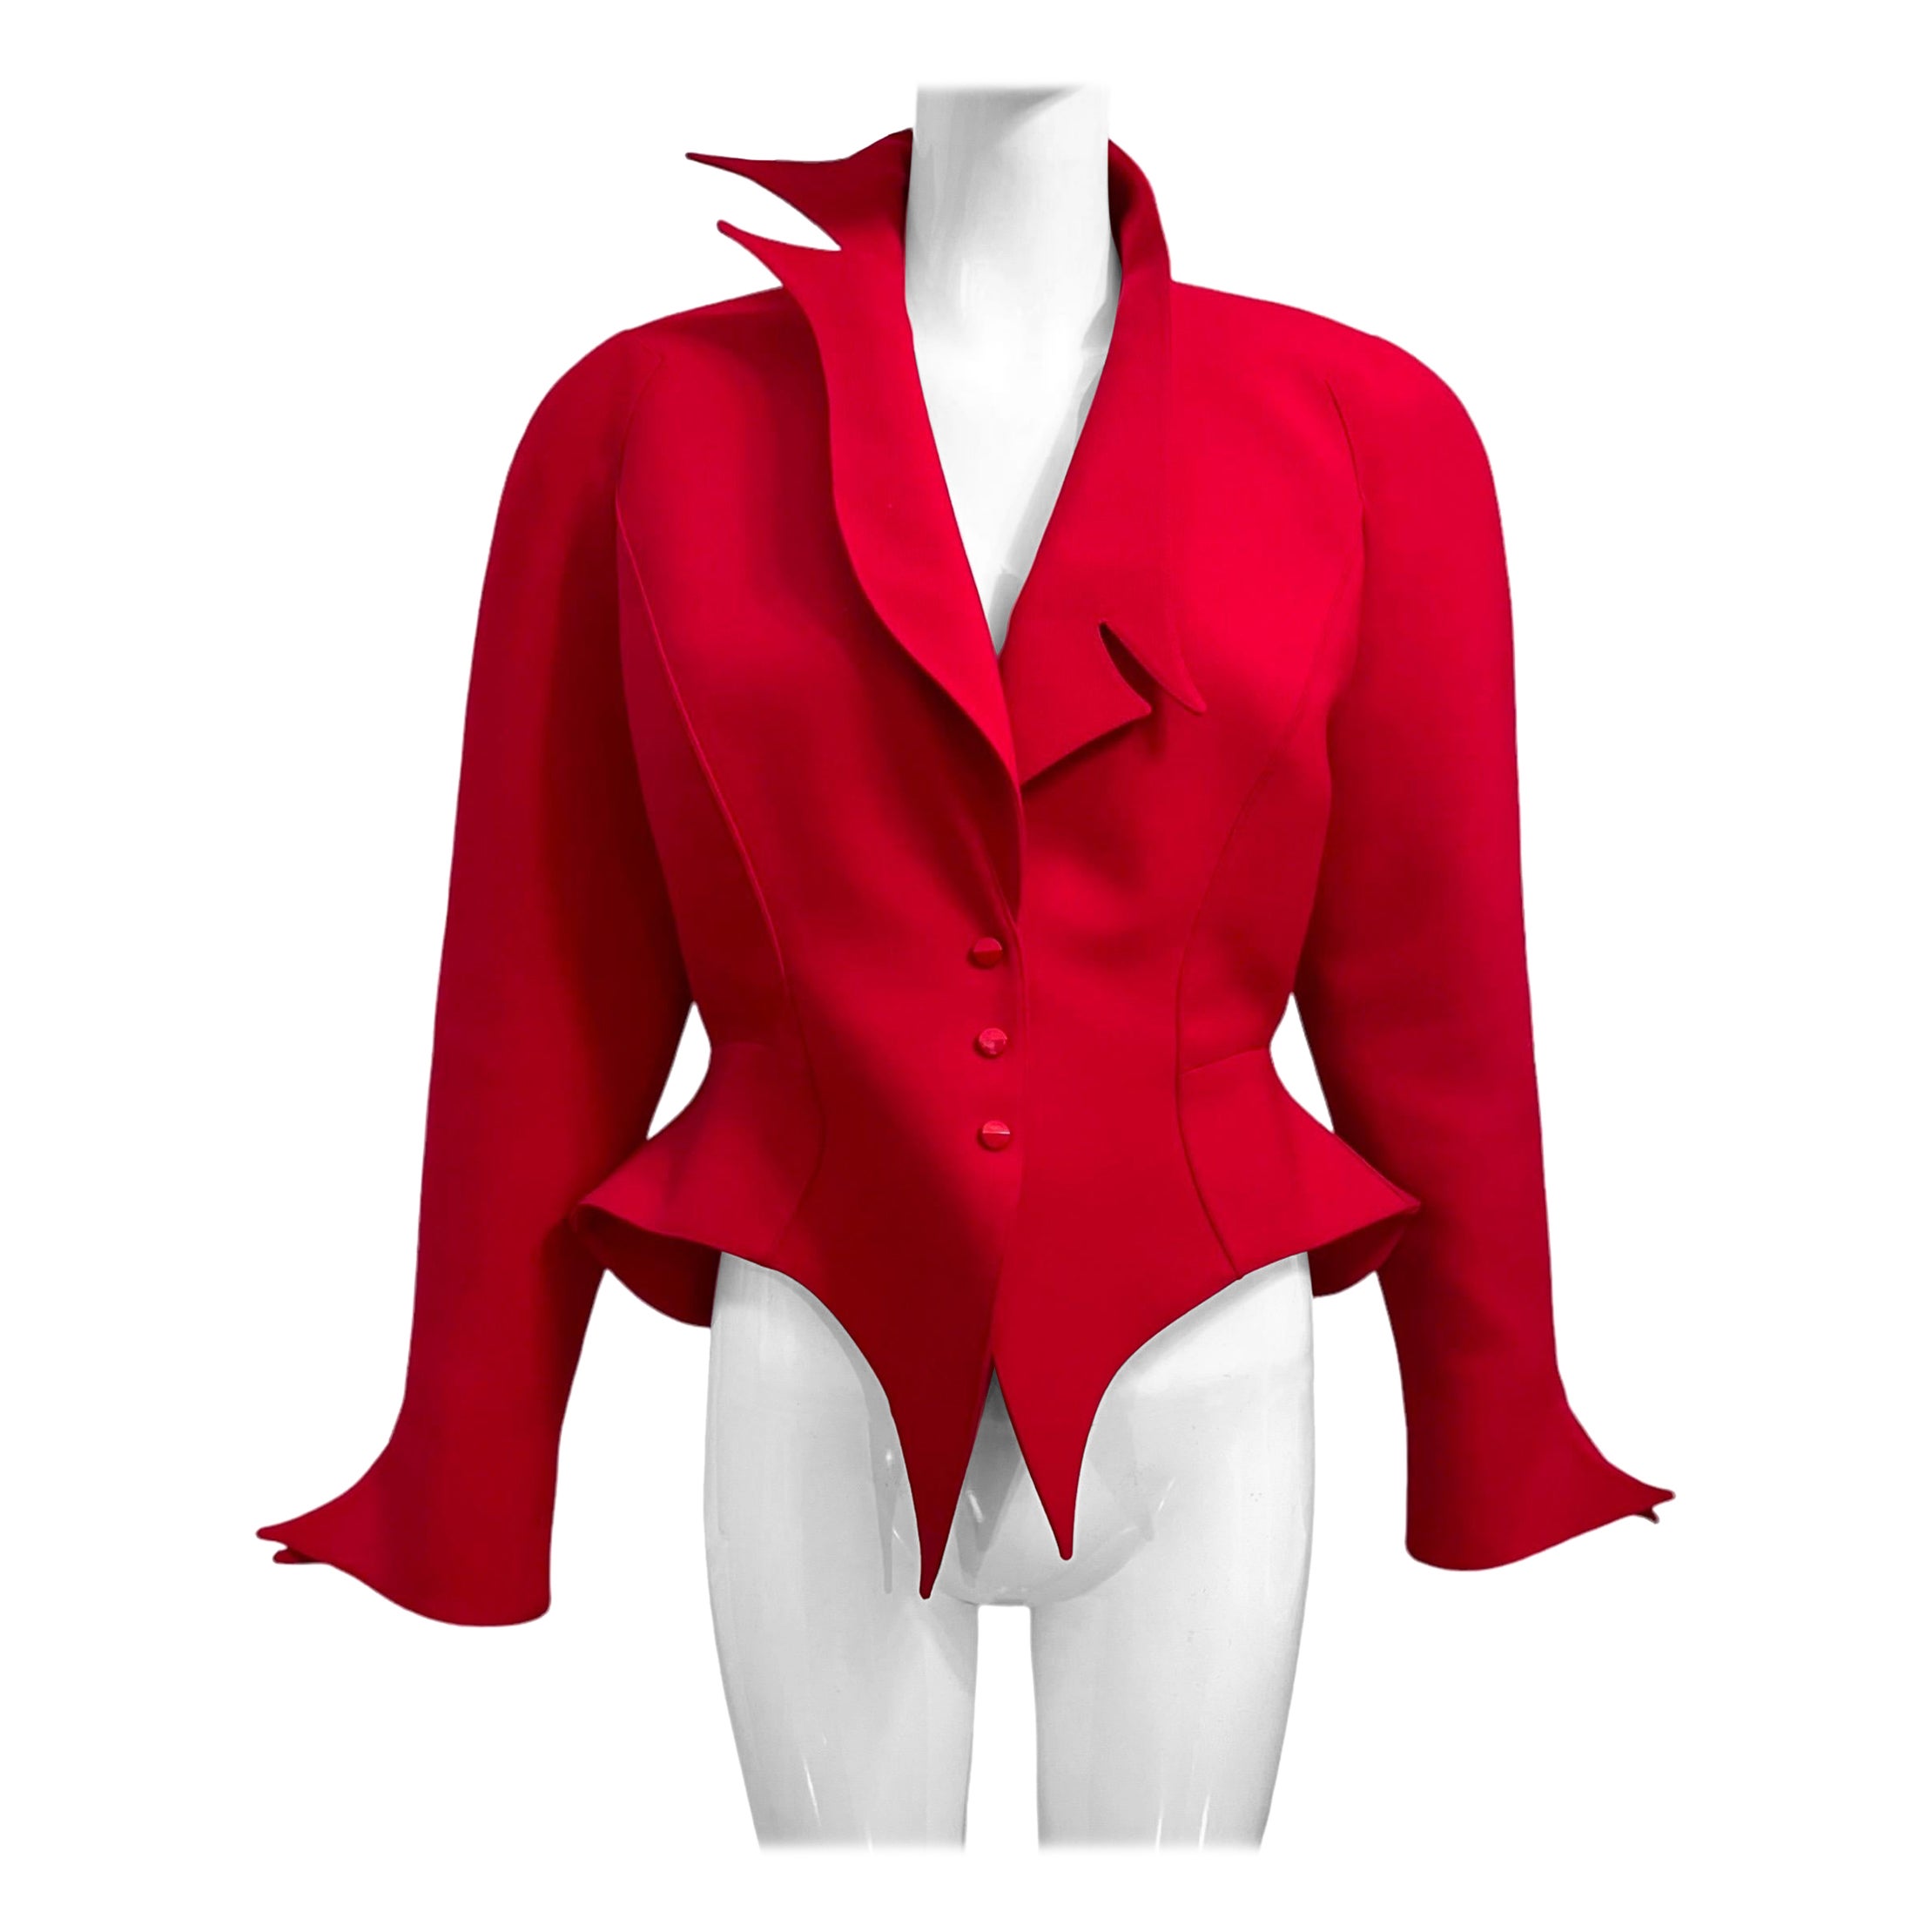 F/W 1988 Thierry Mugler Flaming Red Les Infernales Jagged Sculptural Jacket